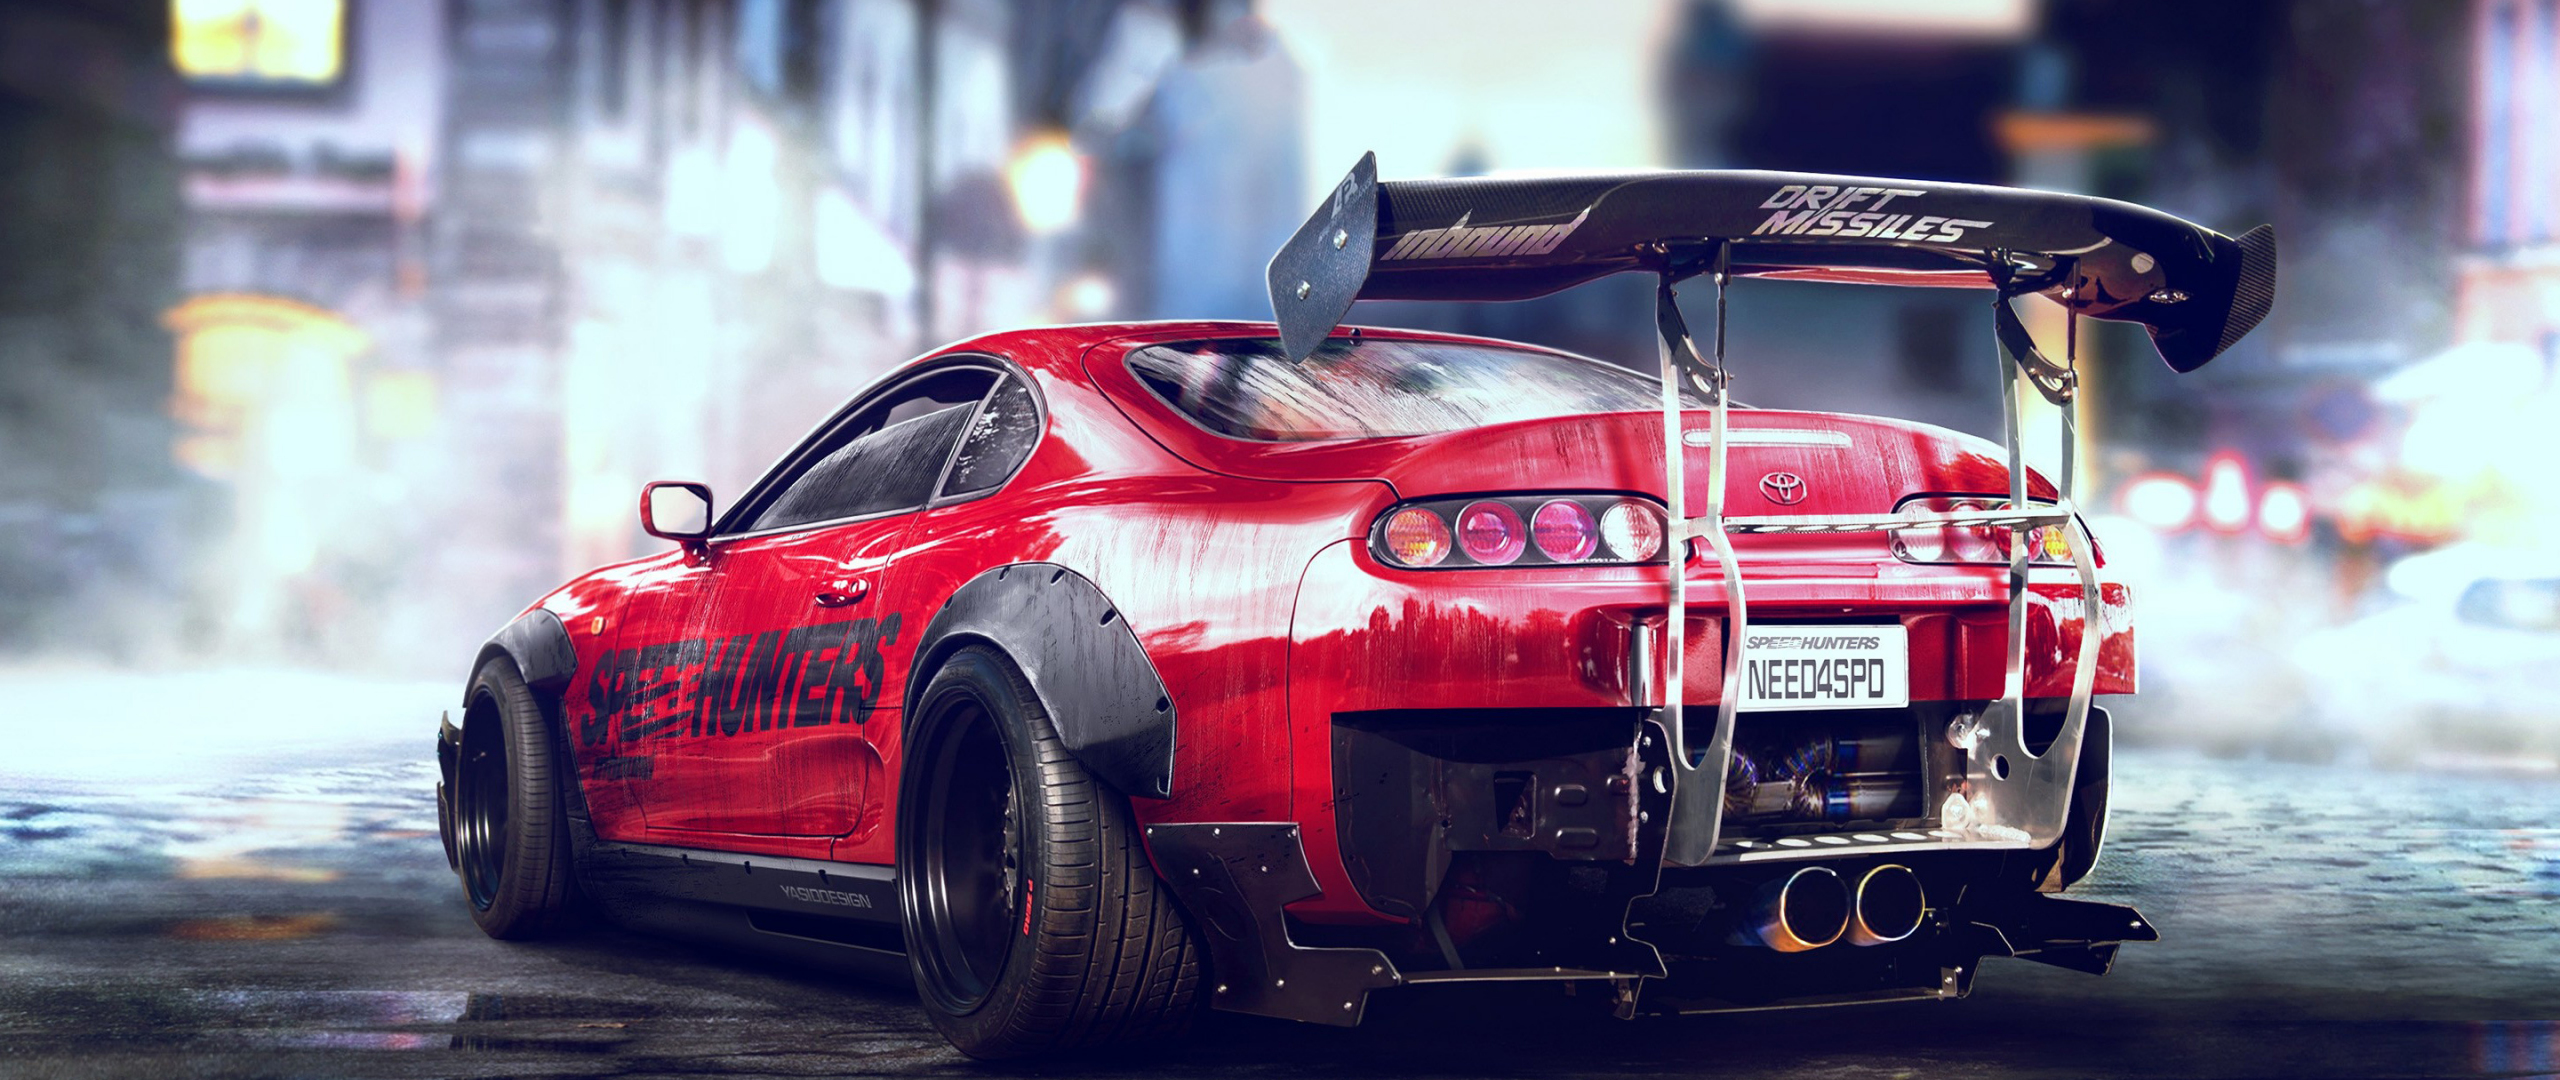 Download 2560x1080 Wallpaper Toyota Supra Need For Speed